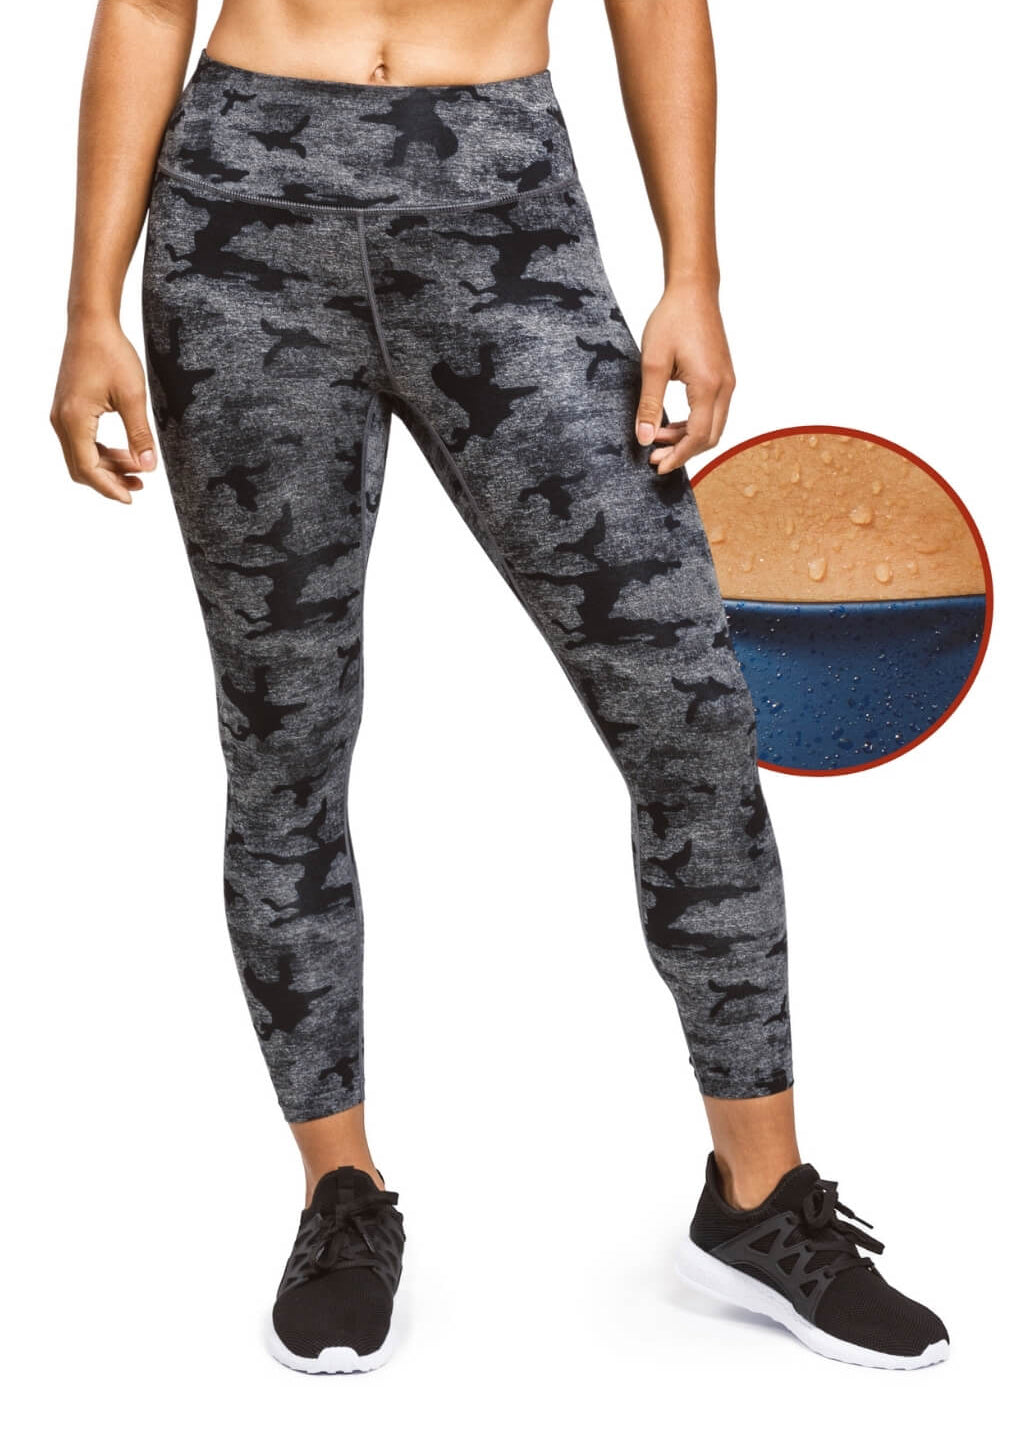 What Are Compression Leggings & What Do They Do? - Sweatbox